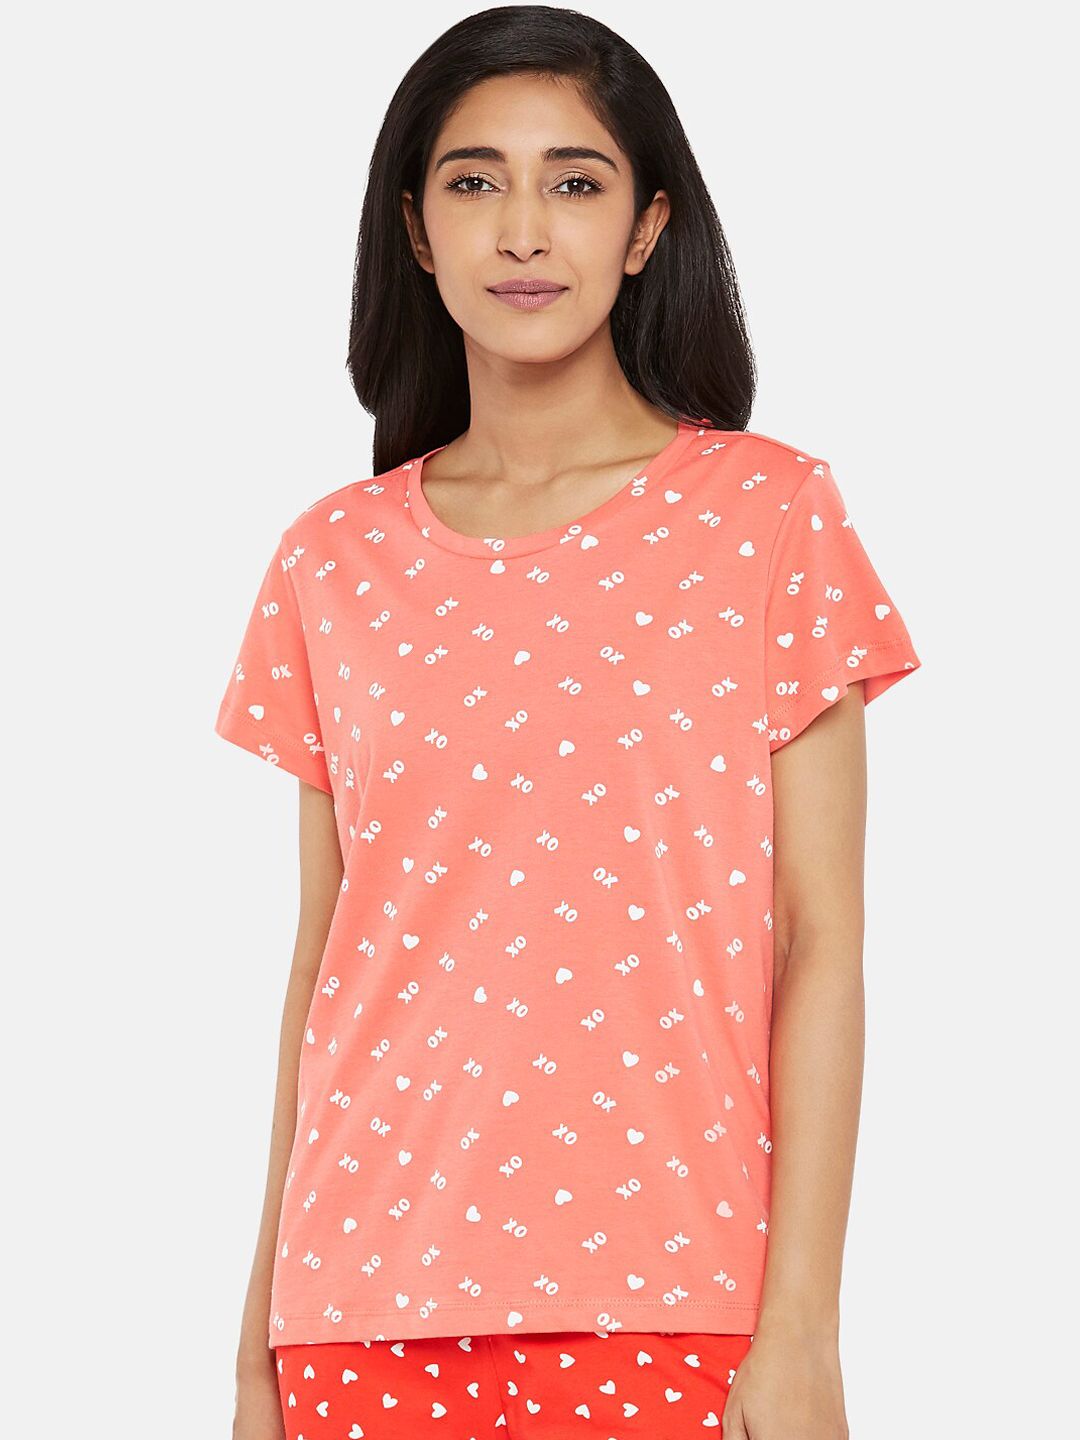 Dreamz by Pantaloons Coral Printed Pure Cotton Regular Lounge tshirt Price in India